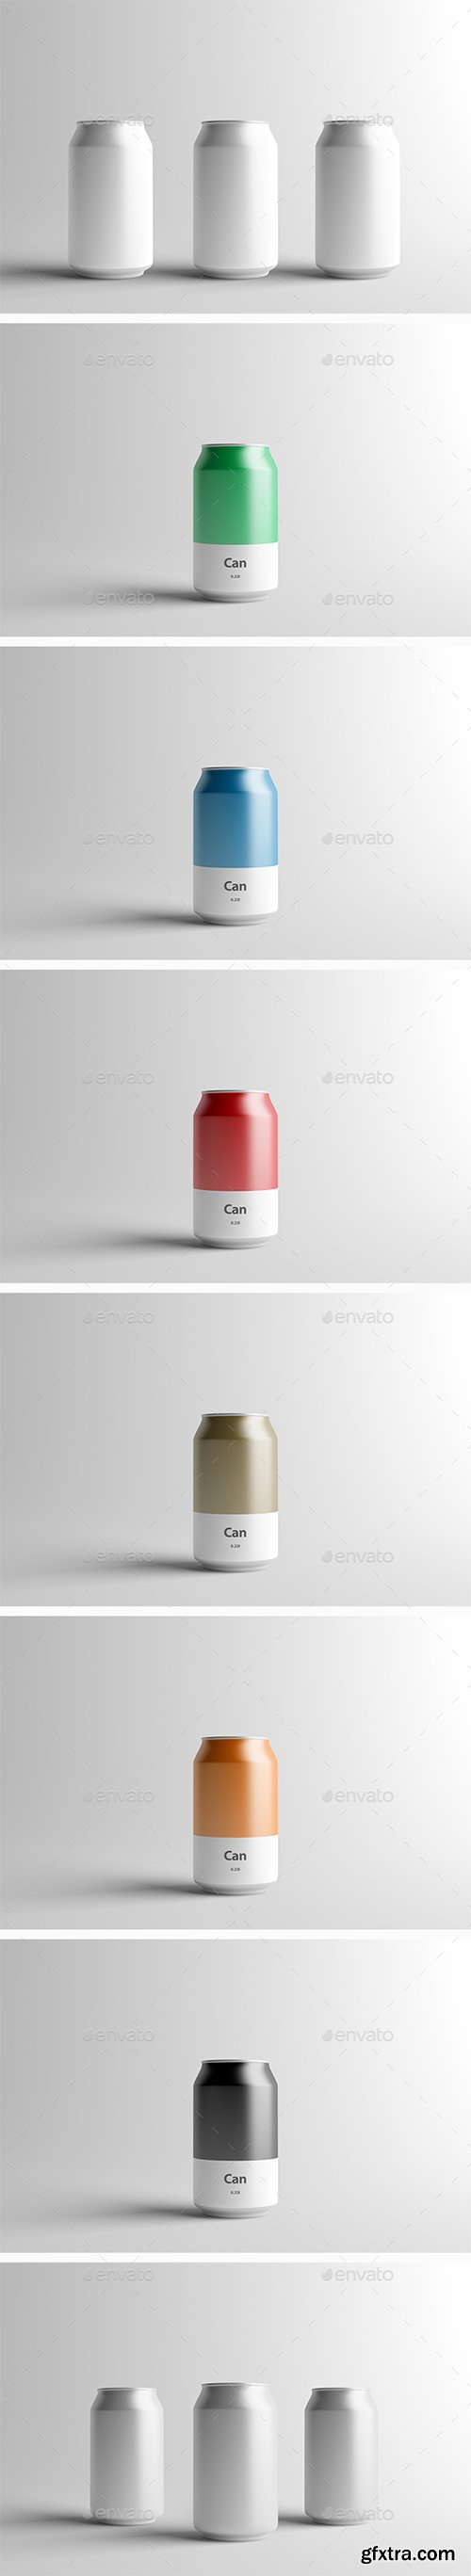 Graphicriver Can Mock-Up - 330ml 16705738